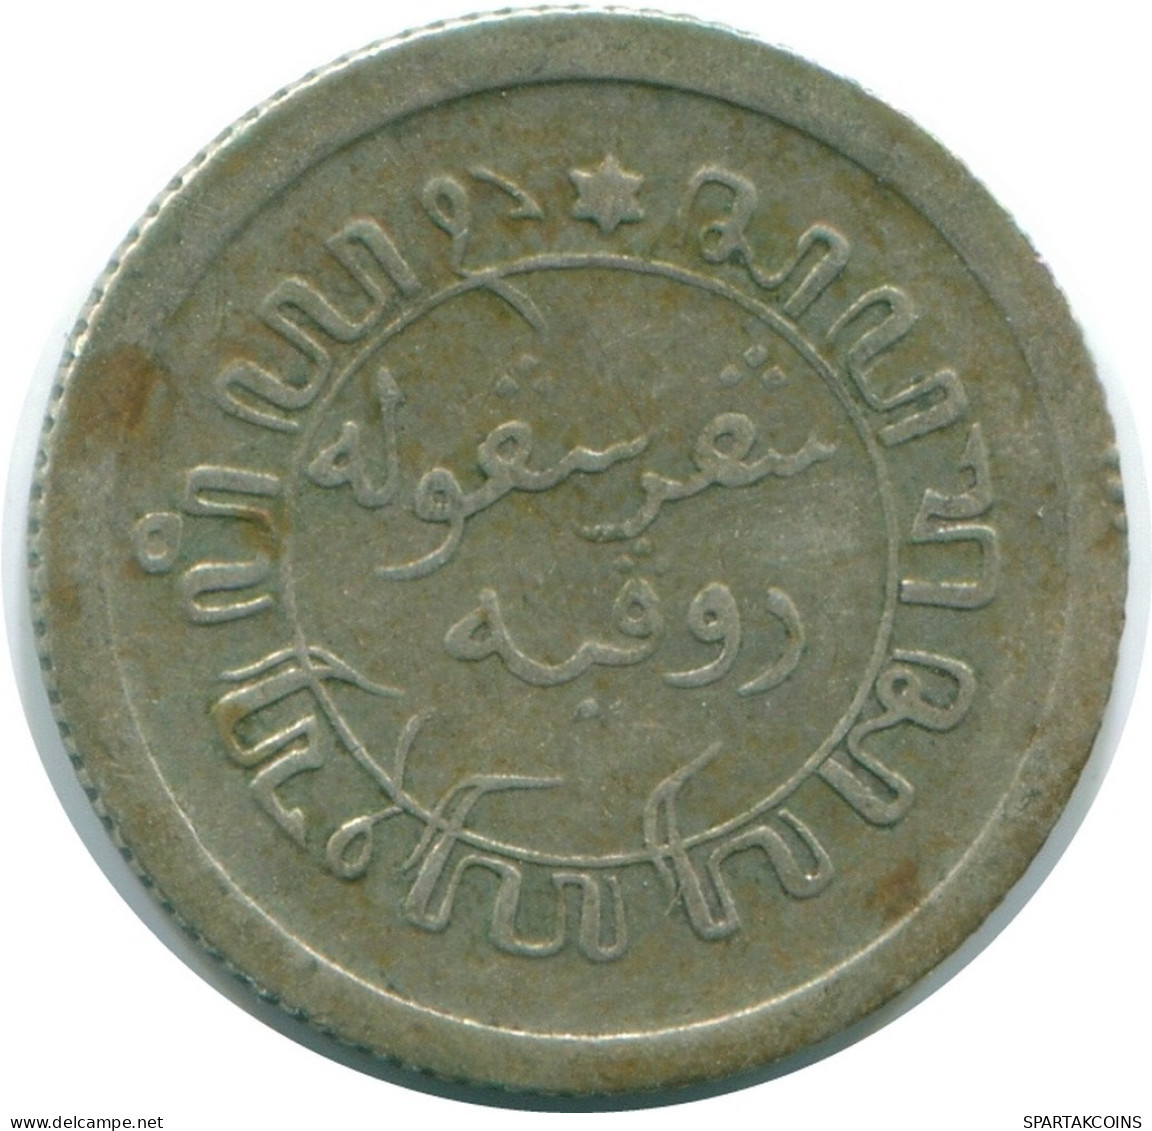 1/10 GULDEN 1928 NETHERLANDS EAST INDIES SILVER Colonial Coin #NL13437.3.U.A - Dutch East Indies